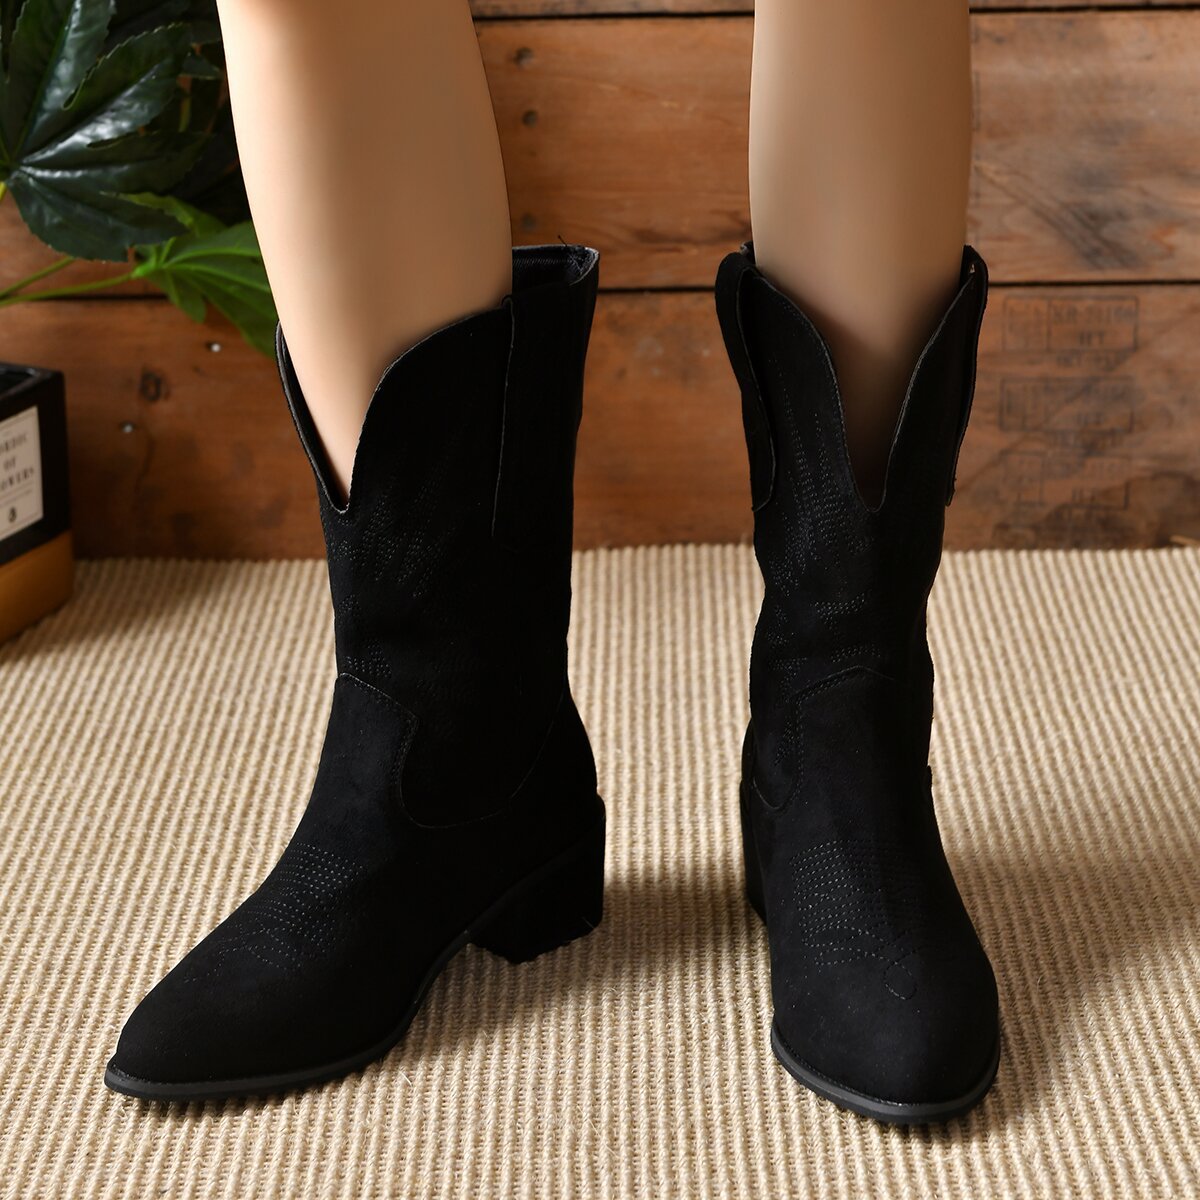 Embroidered cowboy boots front v cut chunky heel mid calf boots